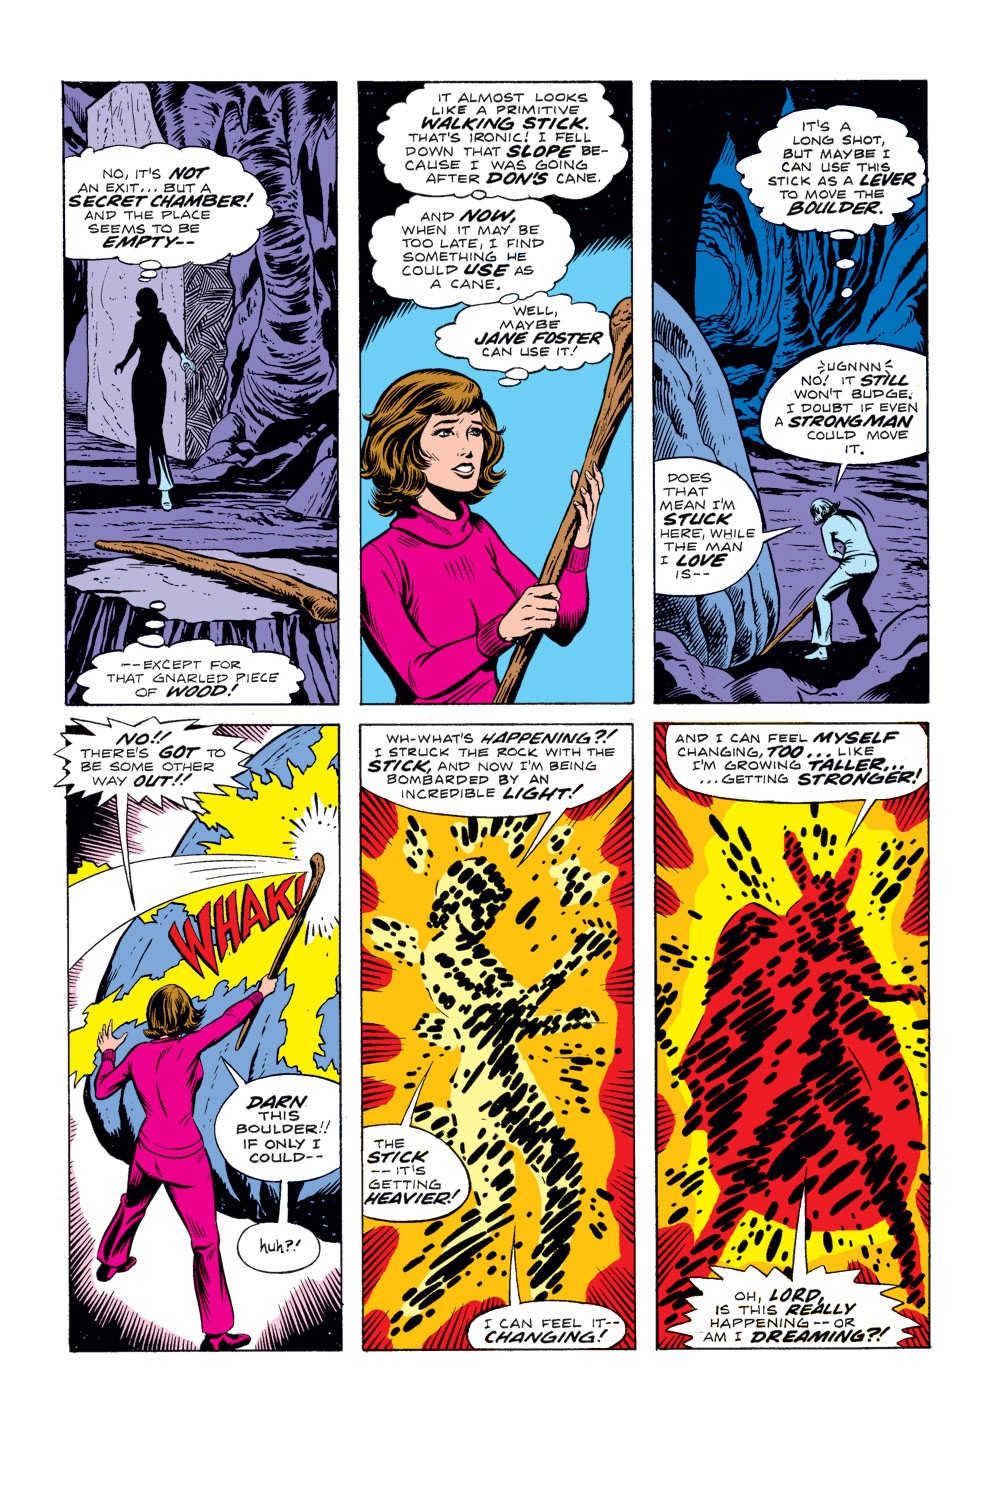 What If? (1977) issue 10 - Jane Foster had found the hammer of Thor - Page 8